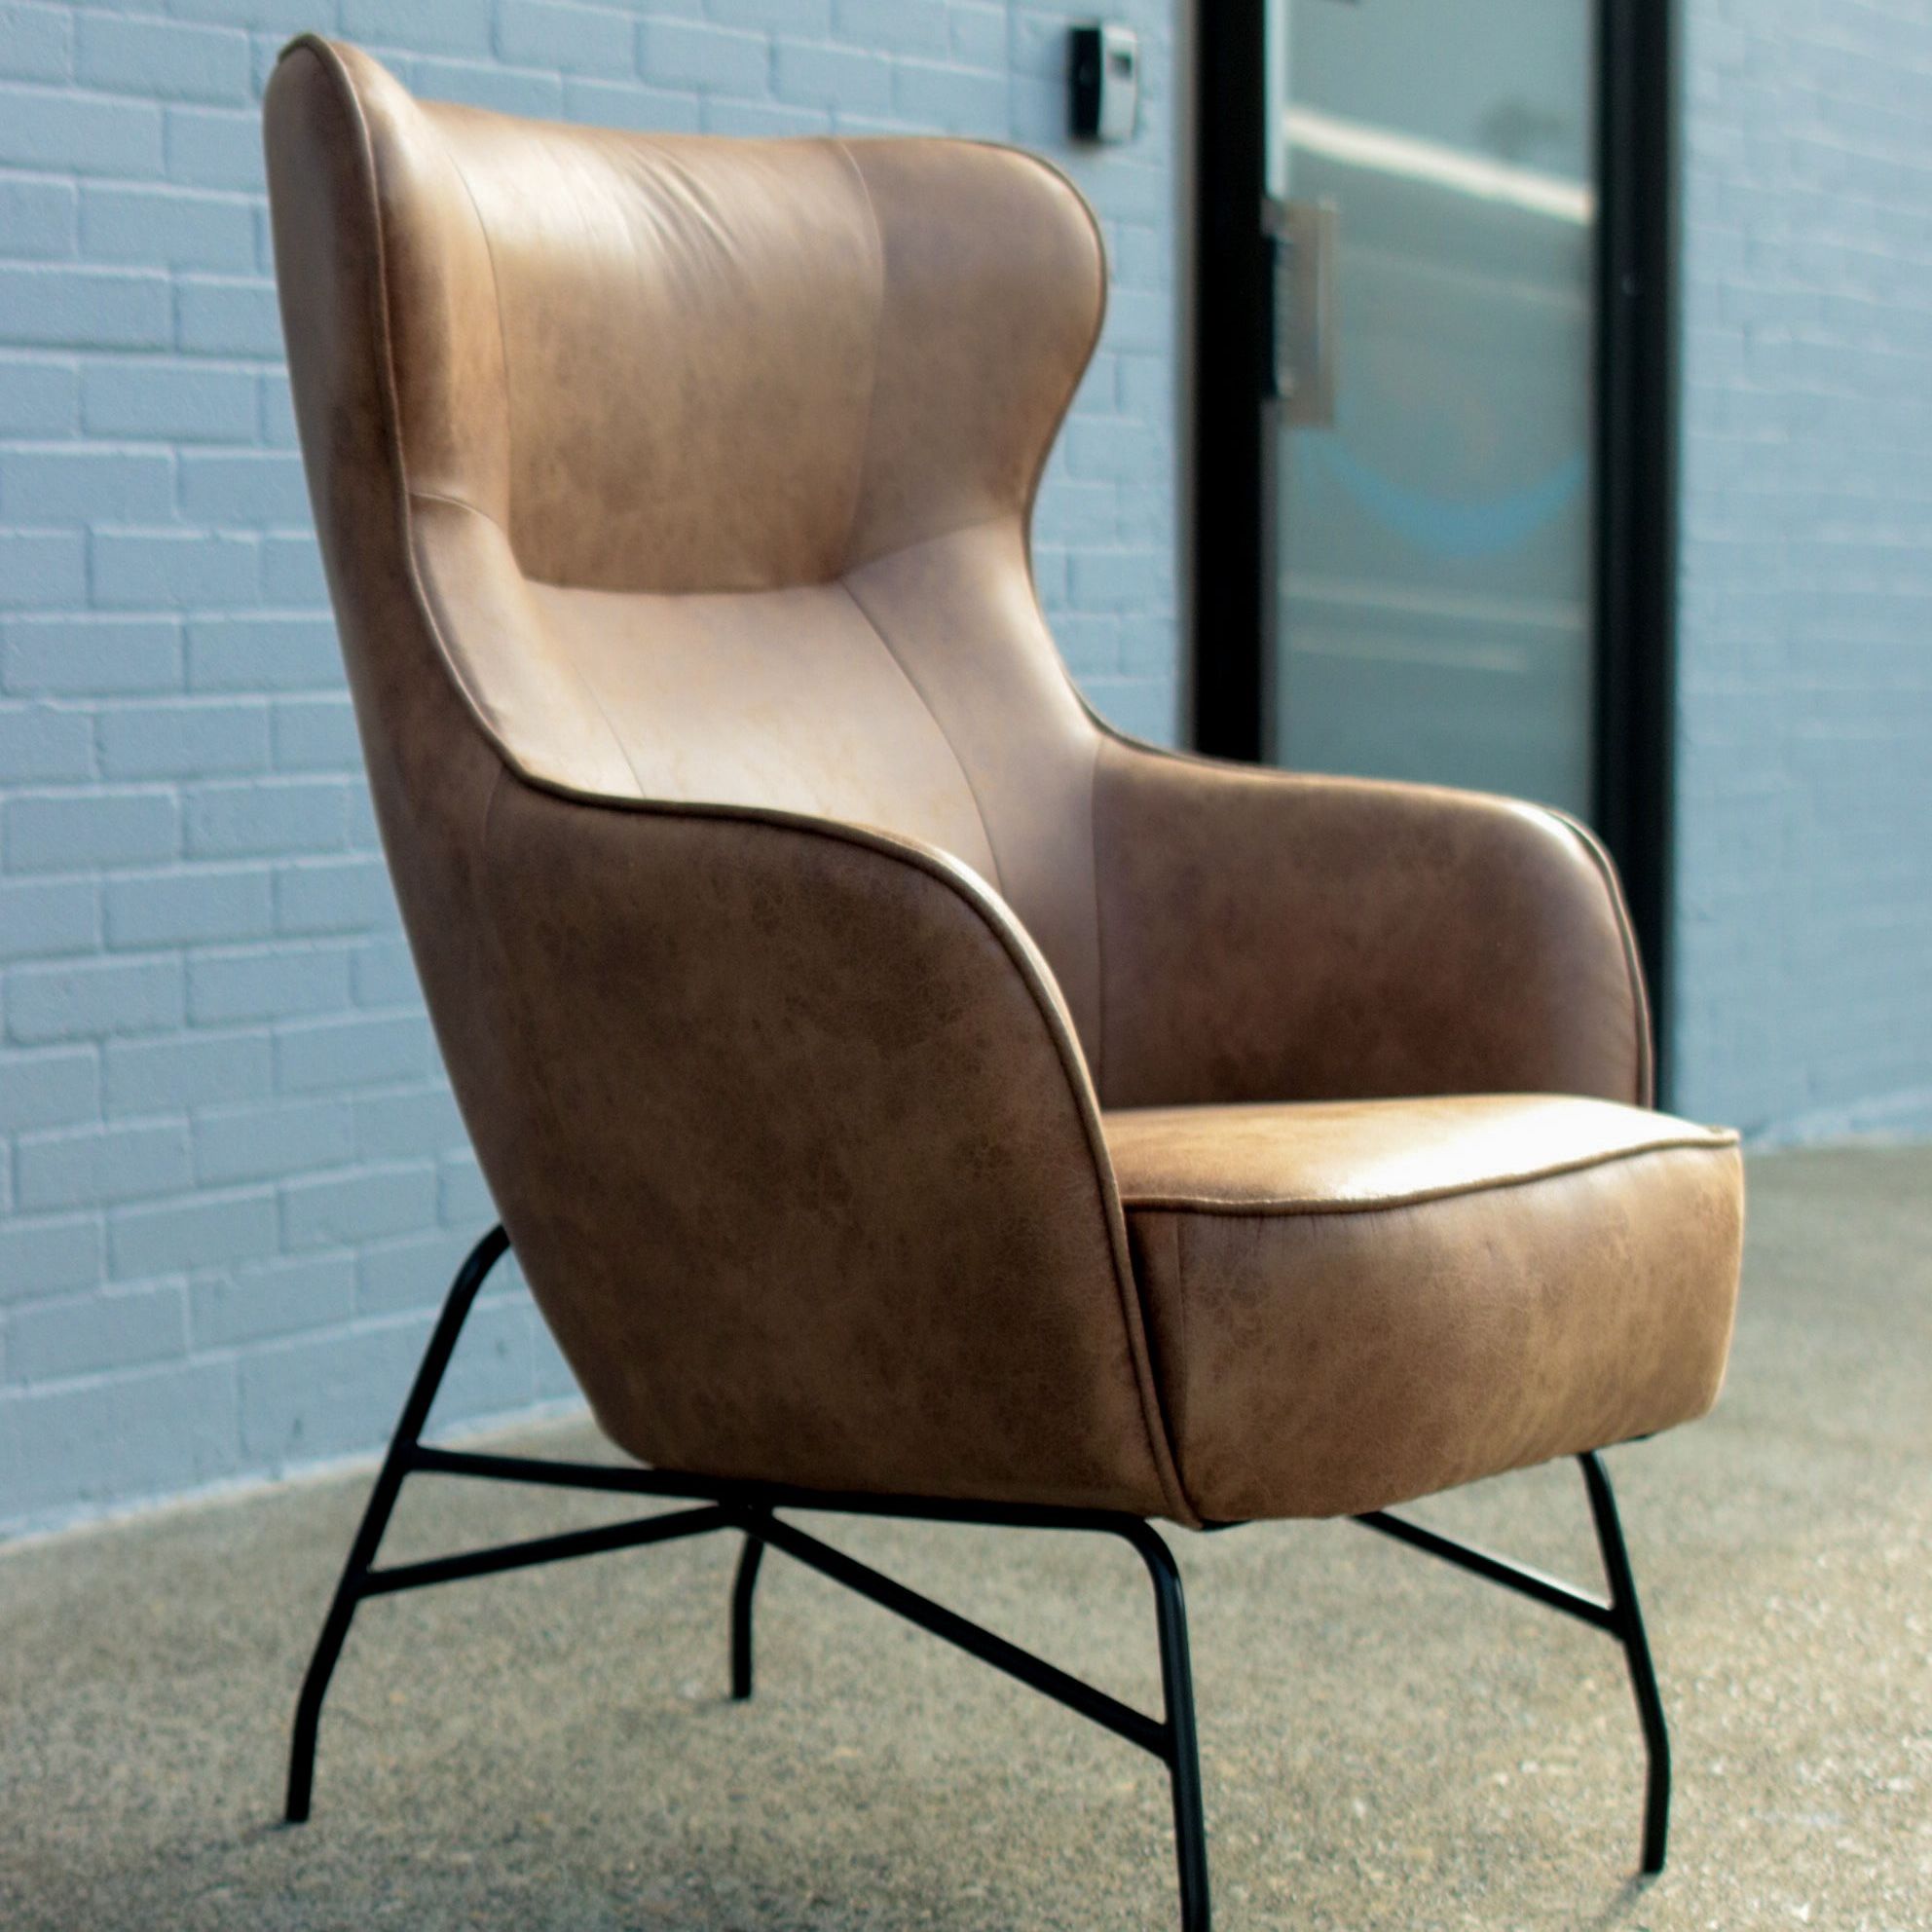 Tan Midcentury Modern Style Wingback Chair ✨ Industrial Saddle Chair 34"x 29" x 42"